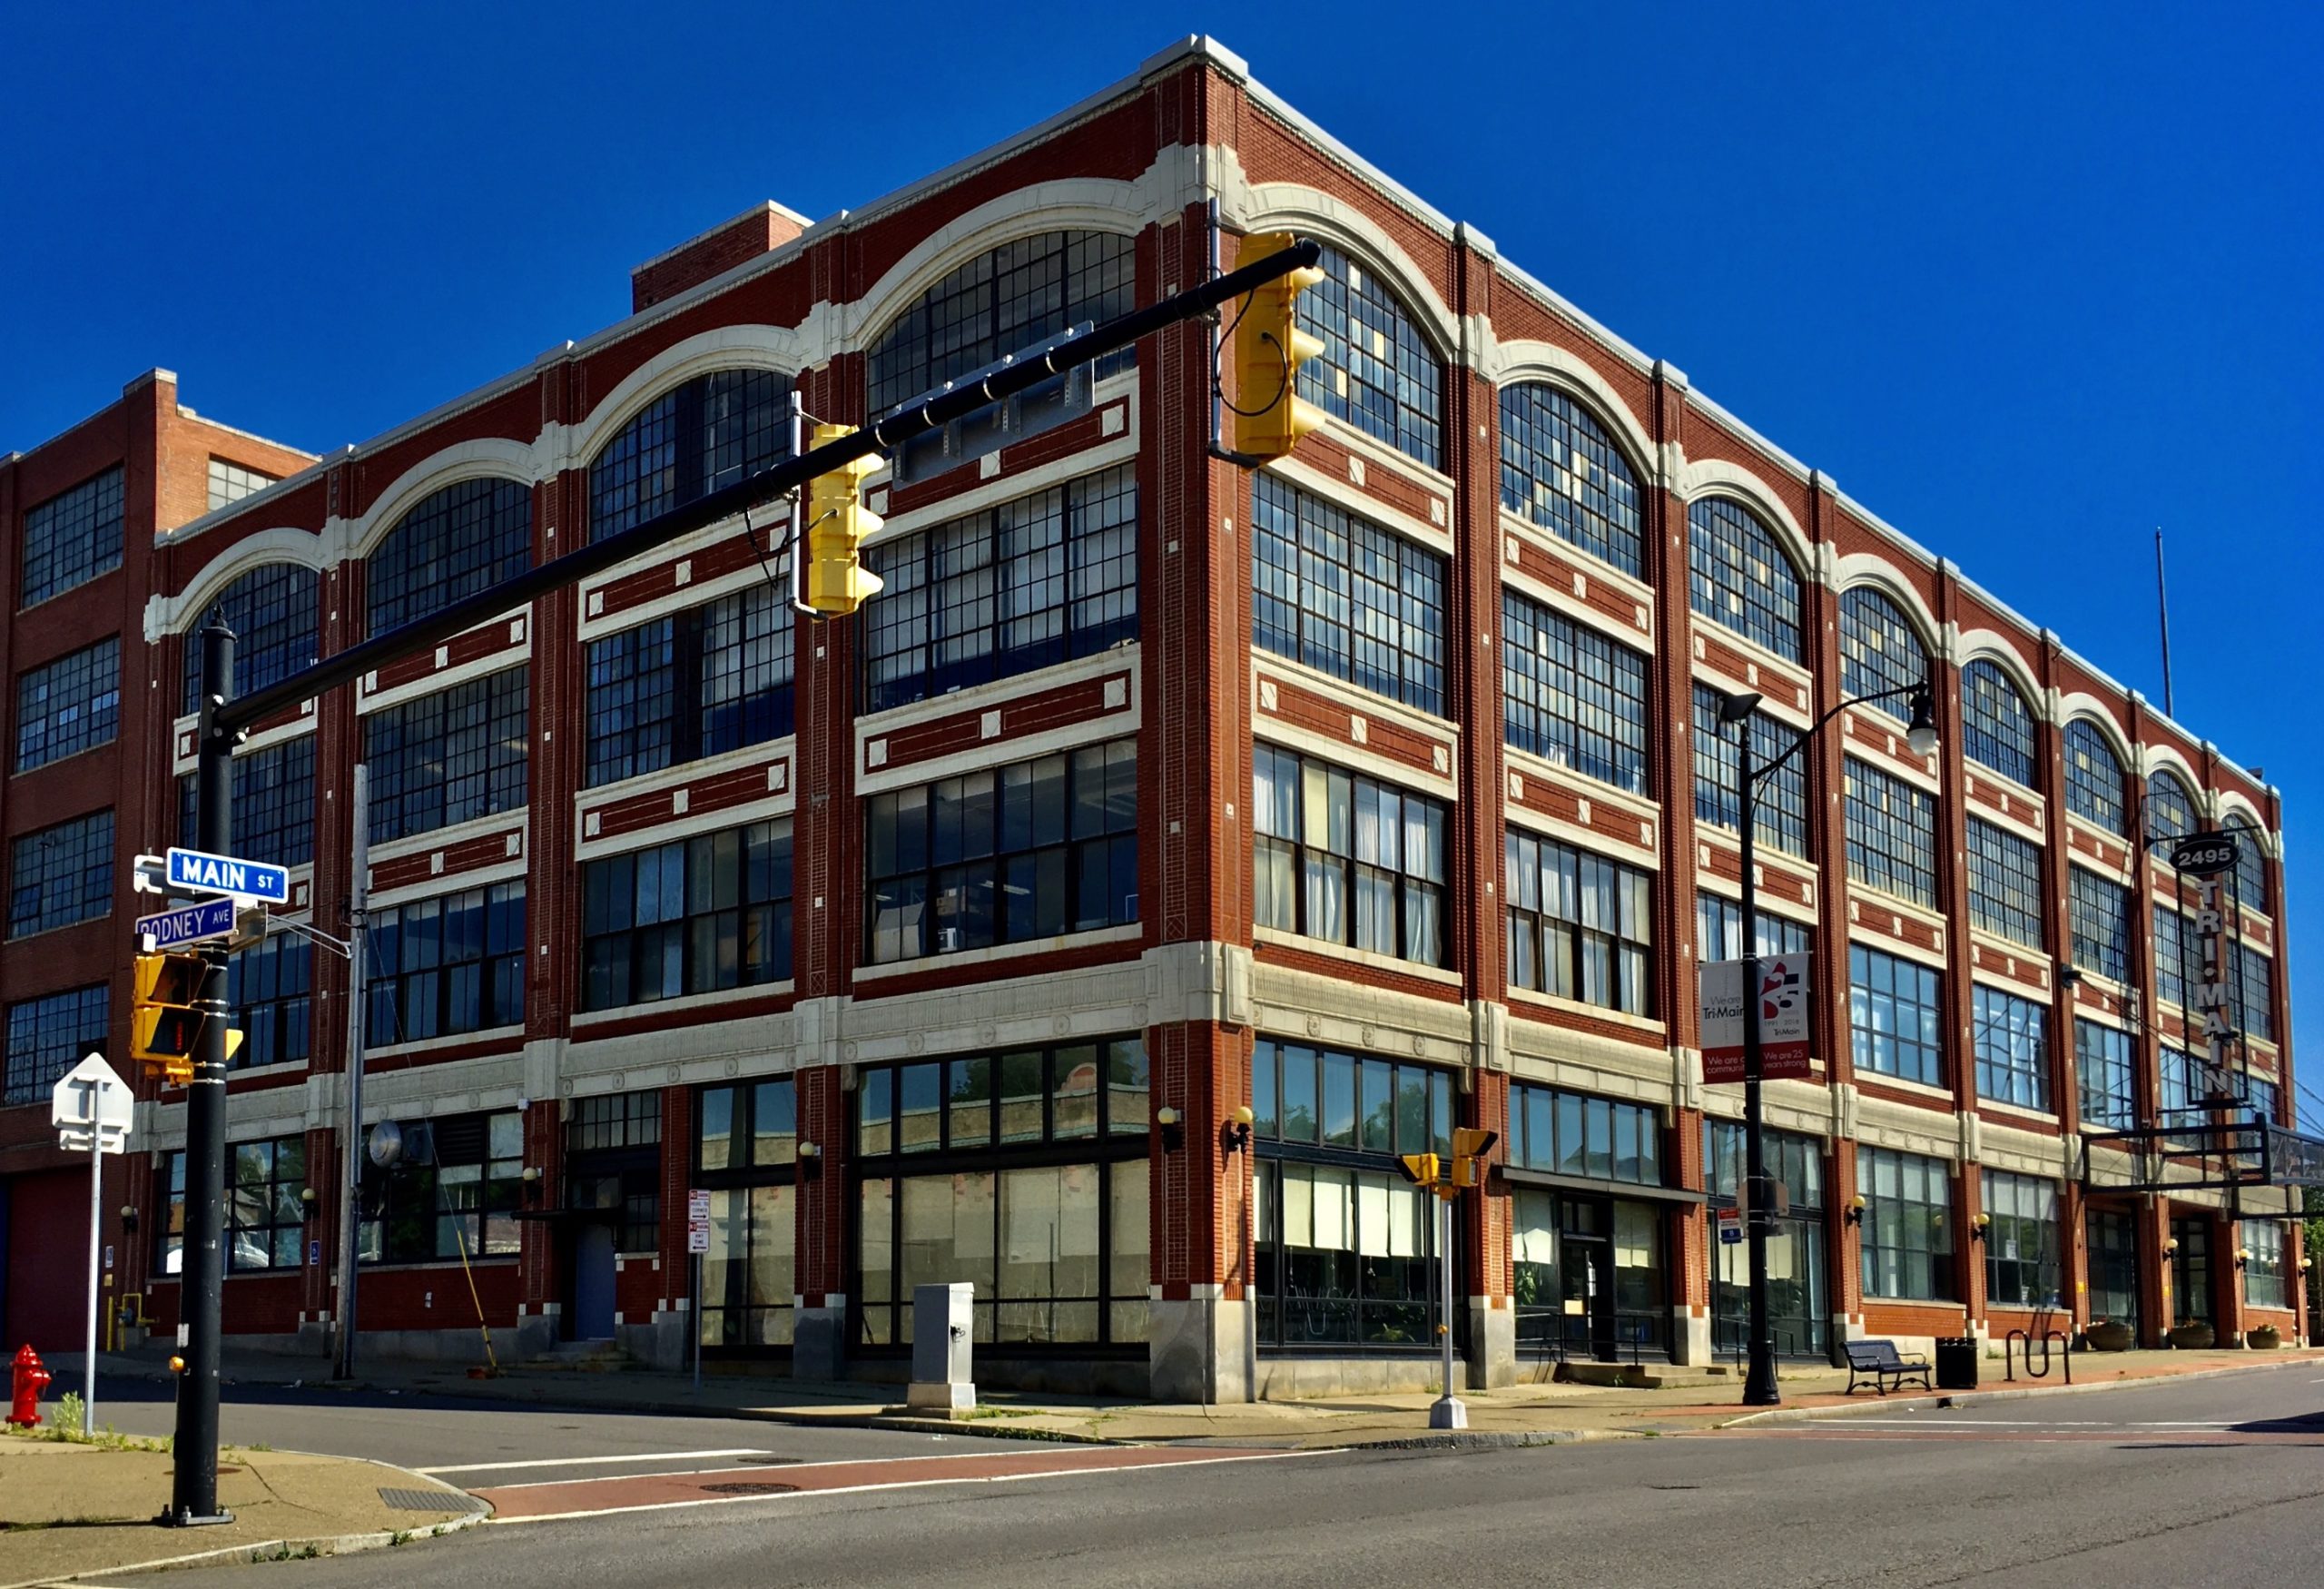 A photograph of the Tri-Main Center by Andre Carrotflower. The Tri-Main Center, 2495 Main Street at Rodney Avenue, Buffalo, New York, June 2020. Constructed in 1915, the building is a textbook example of the Daylight Factory style of industrial architecture pioneered in the early 20th century by Albert Kahn, where large windows bathed the production floors in natural light thus improving the health and morale of the workers. Originally a Ford assembly plant, the complex was sold to the Trico Corporation after the Second World War and became the second of the three windshield wiper factories operated by that company in Buffalo (the others were located on Goodell and Elk Streets respectively). Trico closed the plant in 1987; it's now a mixed-use complex housing offices, studios, and light industrial facilities.